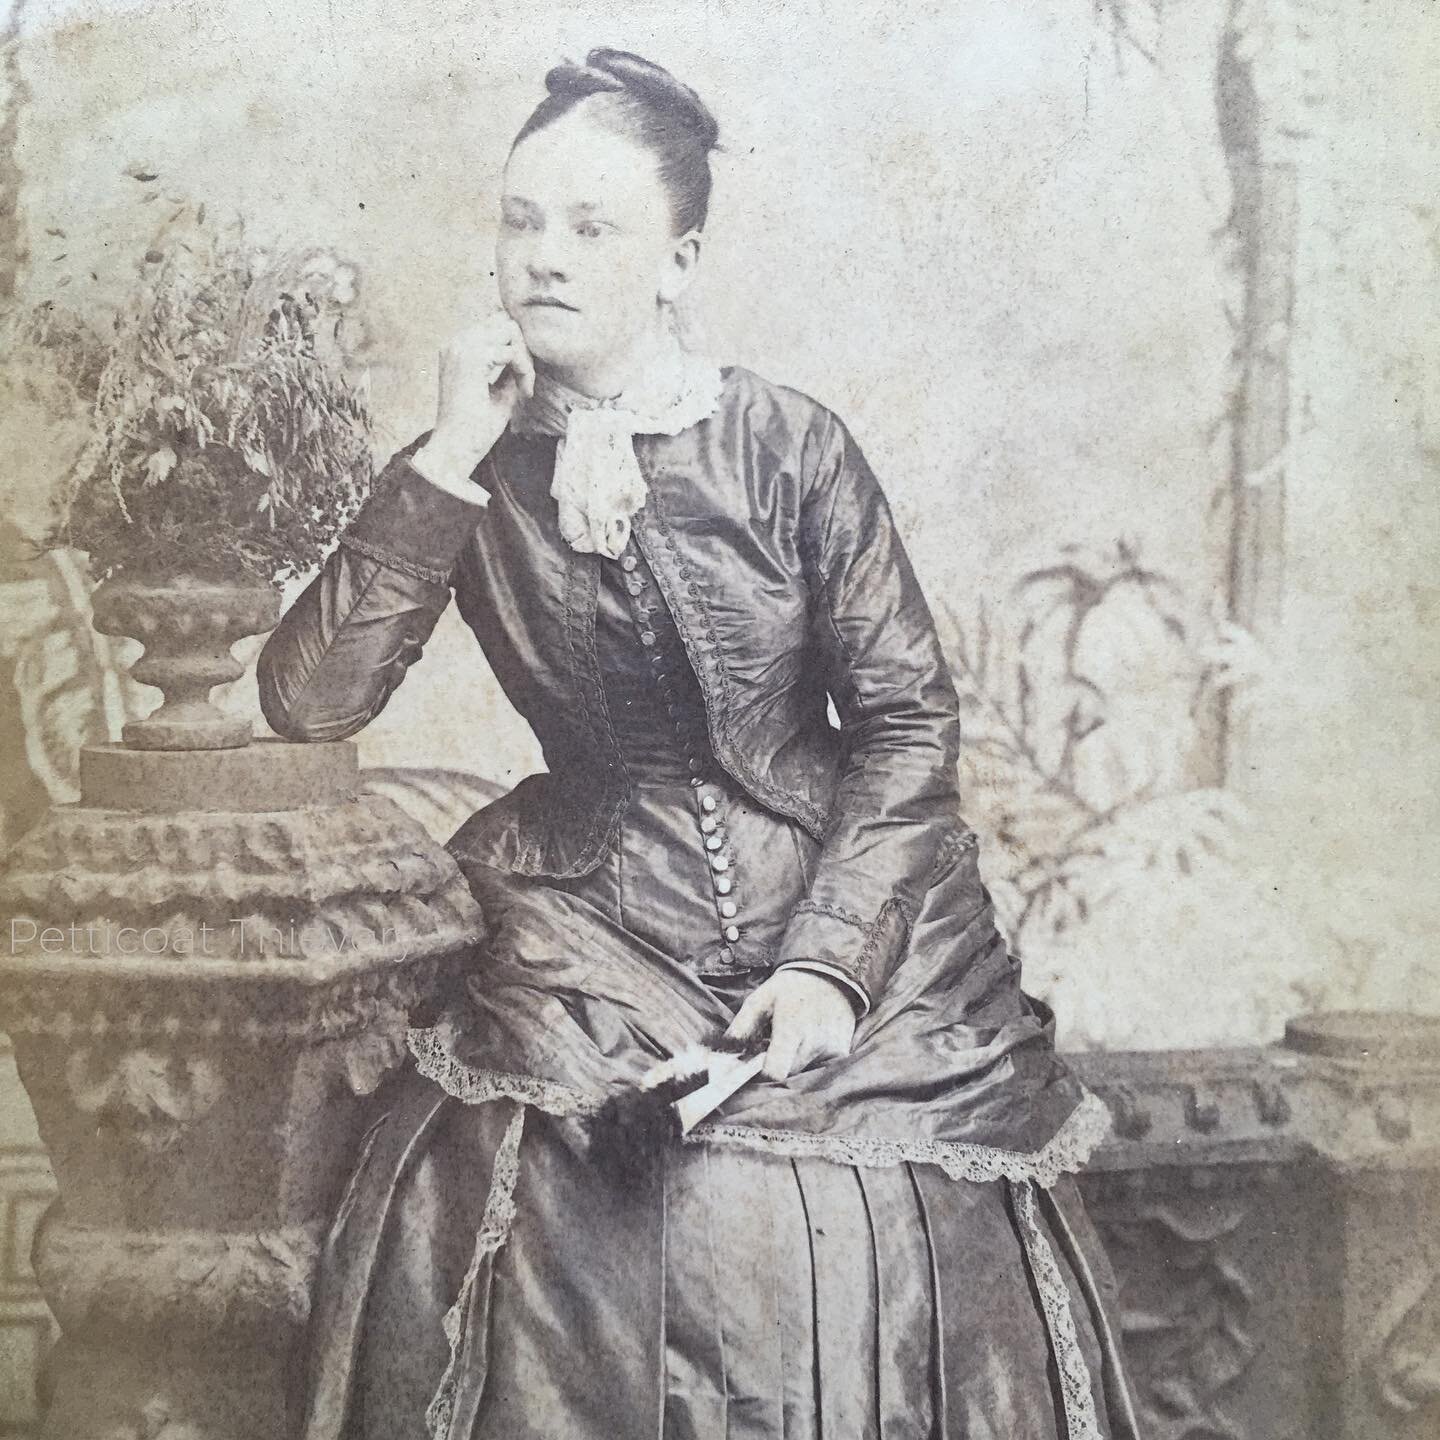 Fashionable lady of the day. Don&rsquo;t miss her feathered fan, buttons, and lace trim
.
.
.
Circa 1880
.
.
.
.
.
#vintage #vintagefashion #vintagestyle #vintagephotography #photography #foundphoto #foundphotos #fotografia #fotografie #vintagephoto 